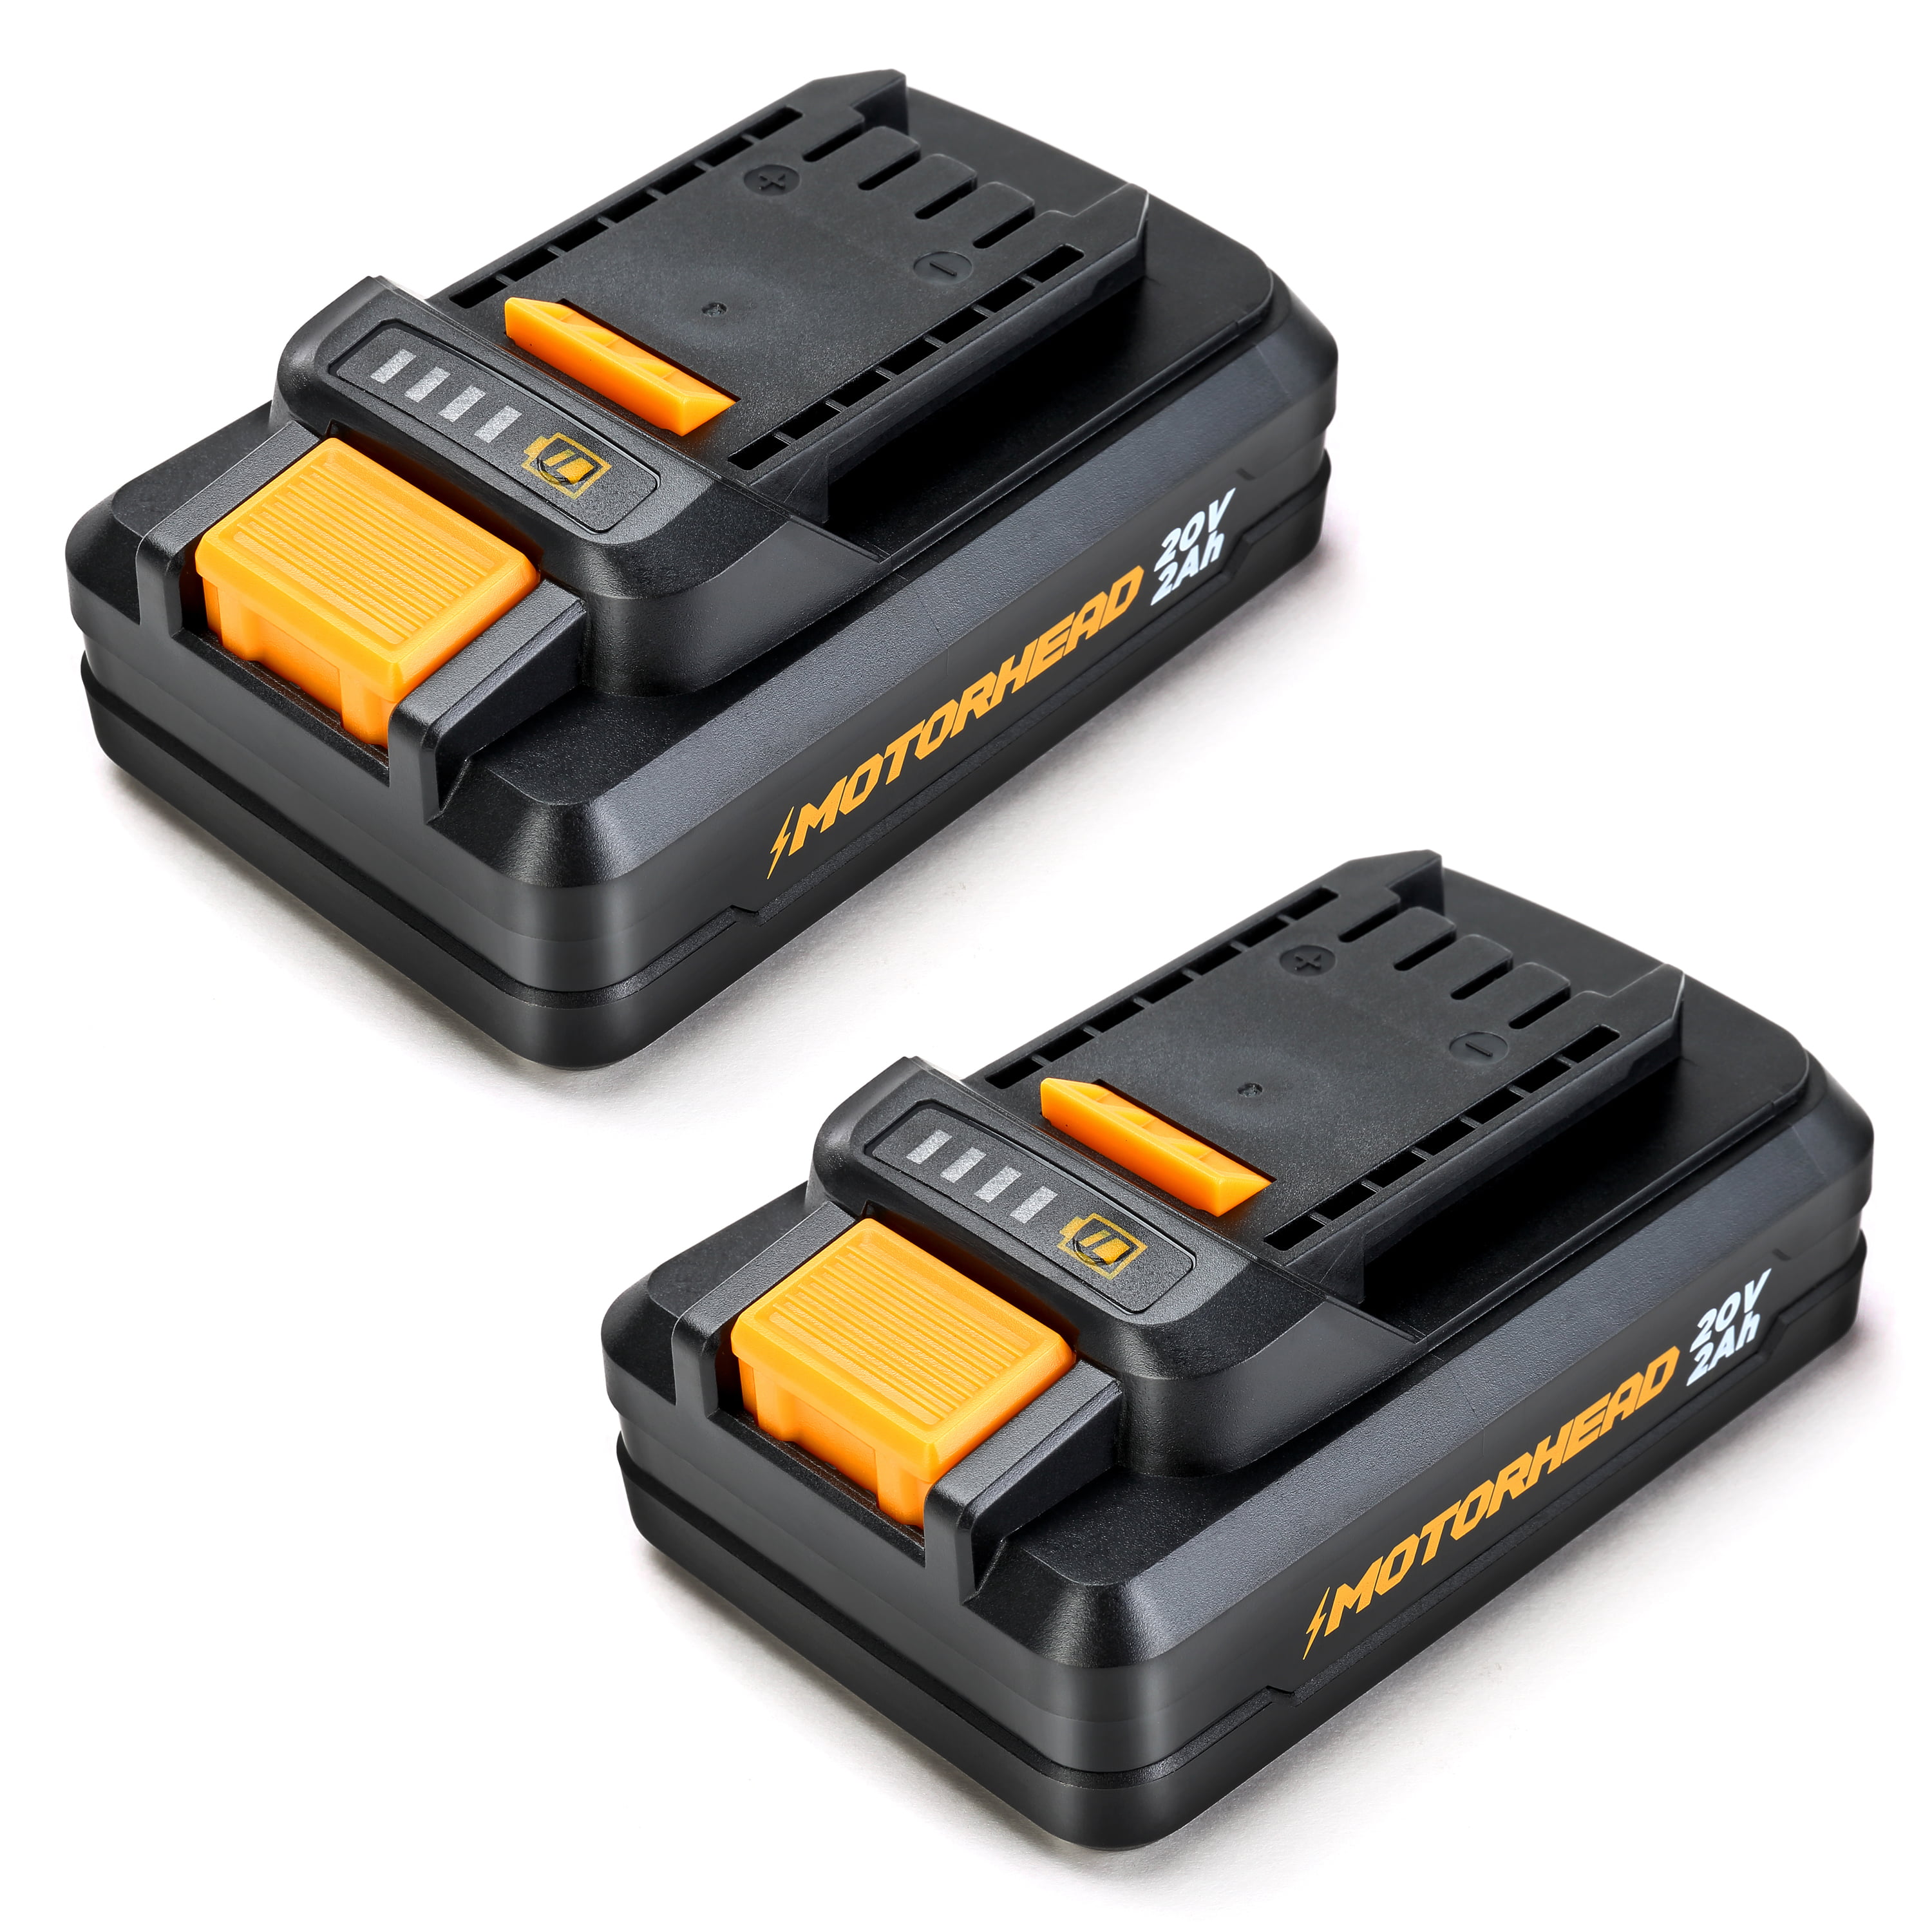 Motorhead Ultra 20V Lithium-Ion 2Ah Compact Battery with 